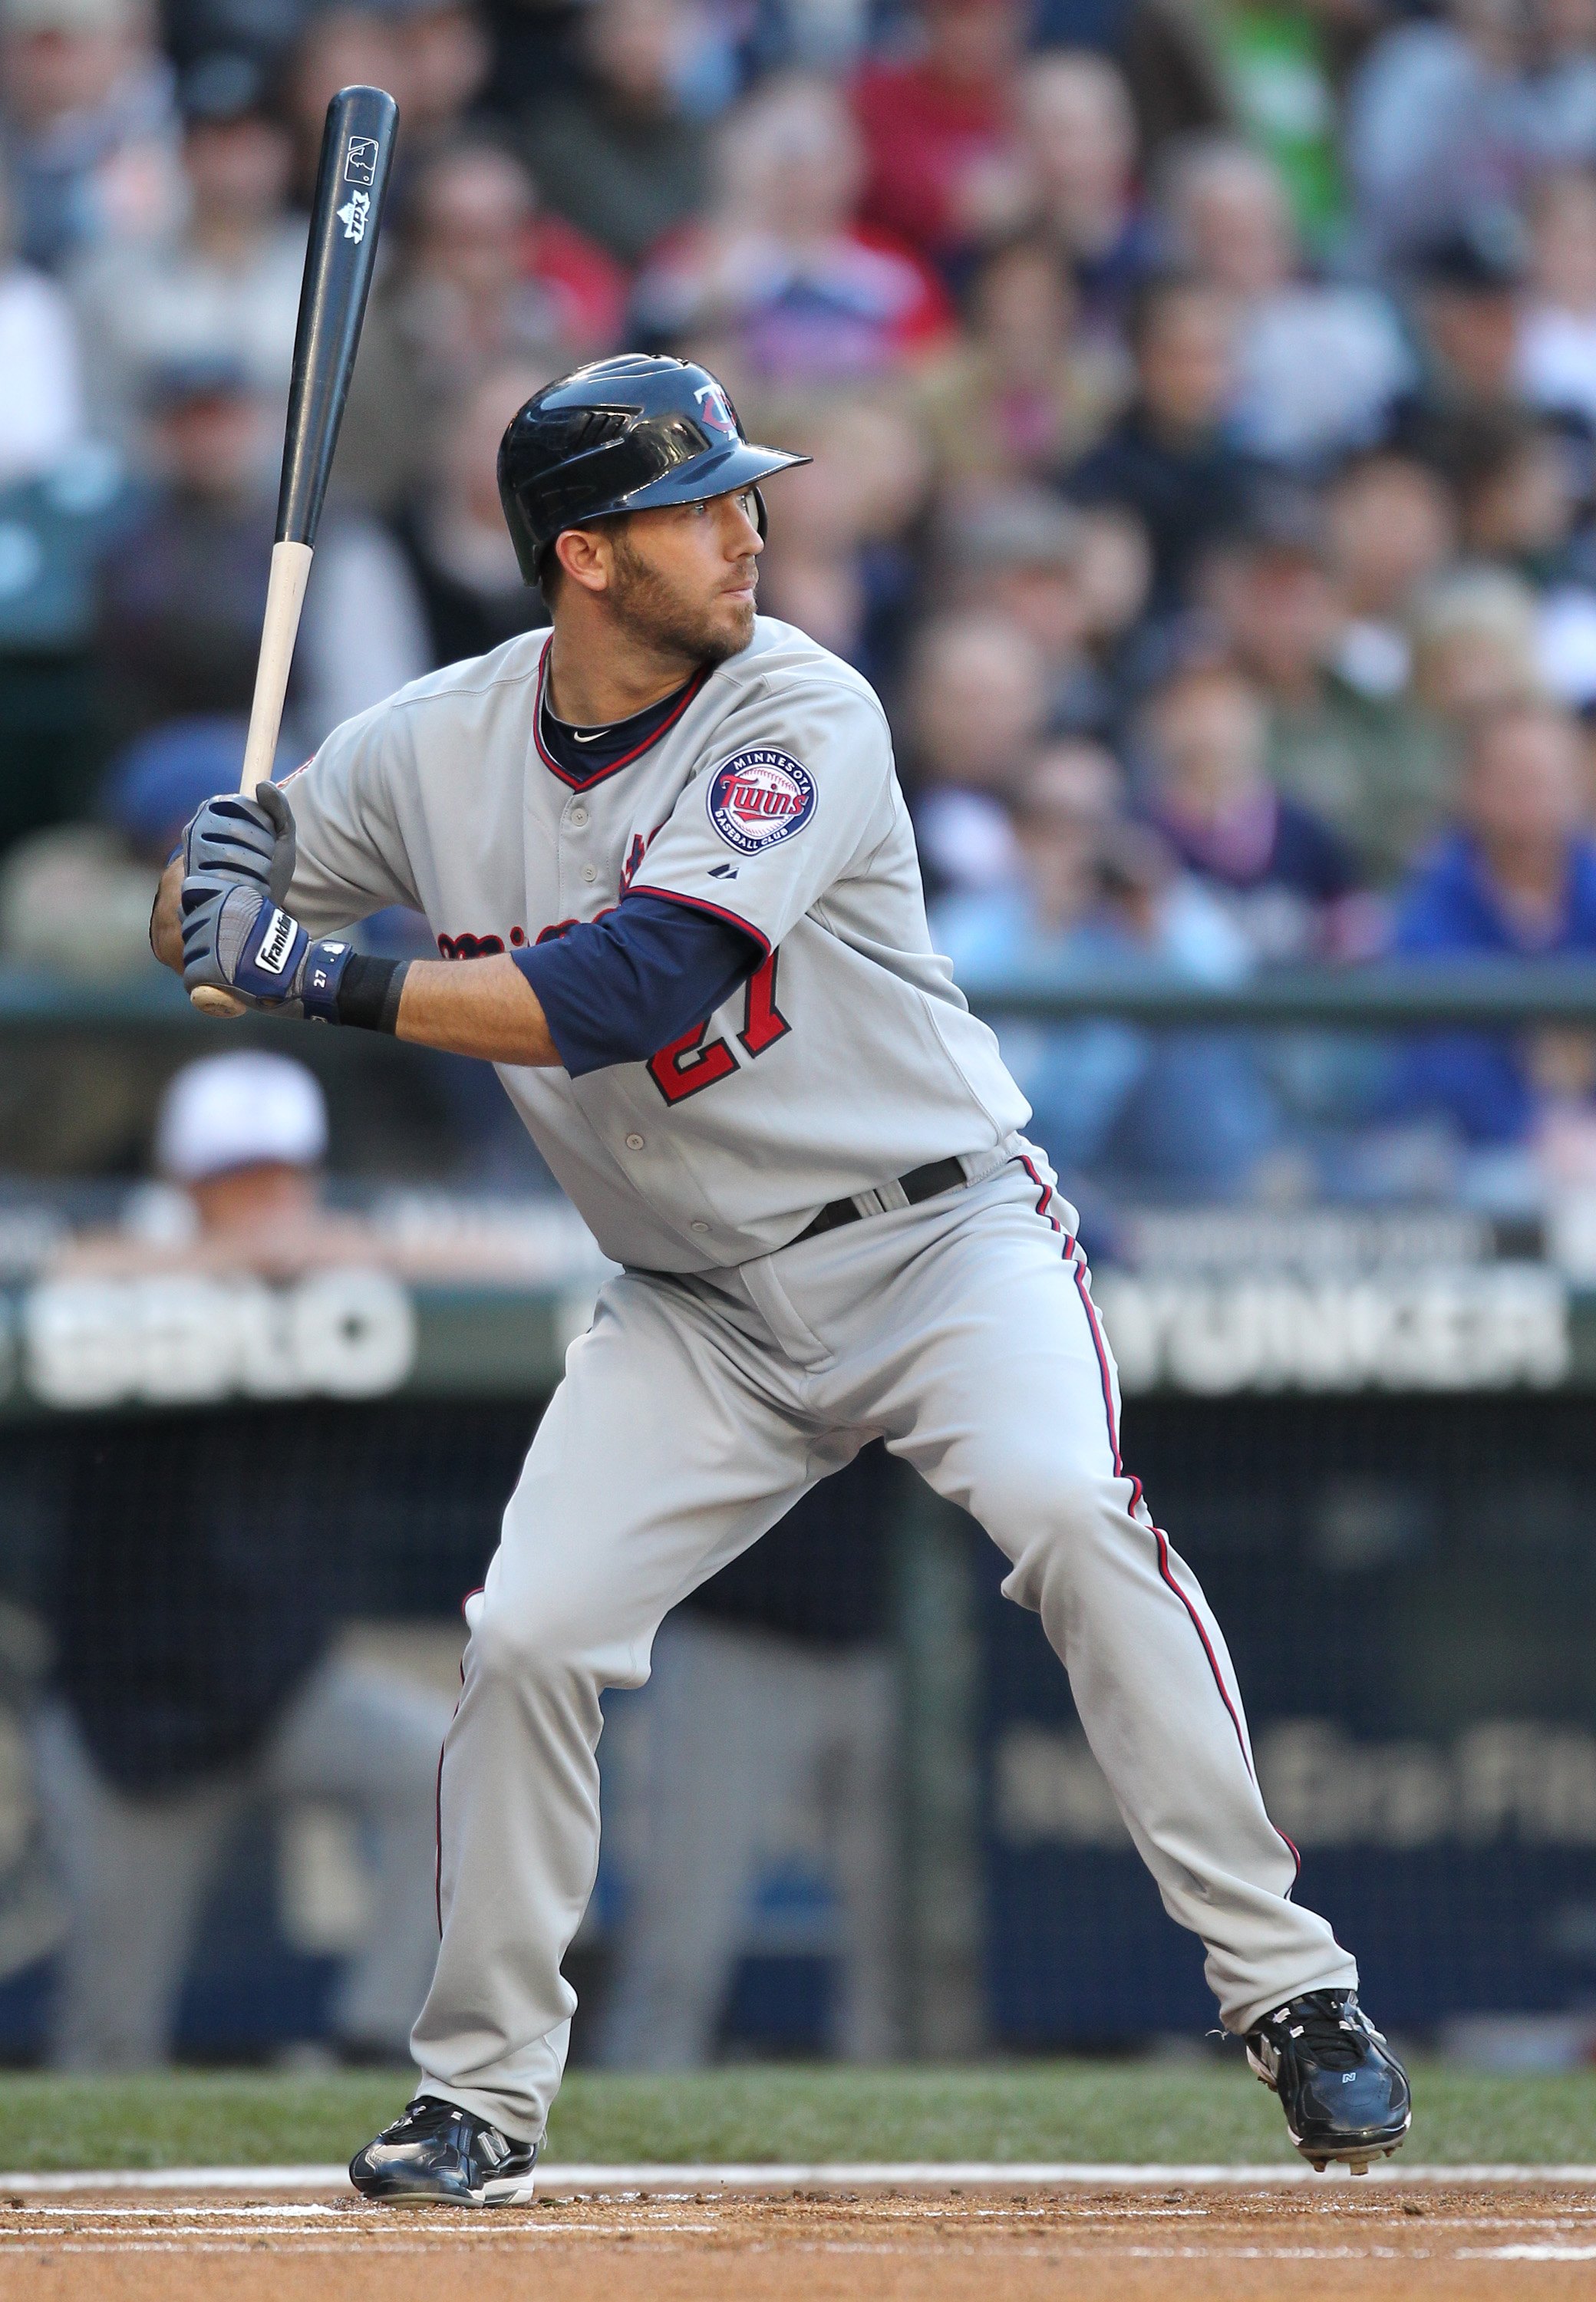 SEATTLE - MAY 31:  J.J. Hardy #27 of the Minnesota Twins bats against the Seattle Mariners at Safeco Field on May 31, 2010 in Seattle, Washington. (Photo by Otto Greule Jr/Getty Images)